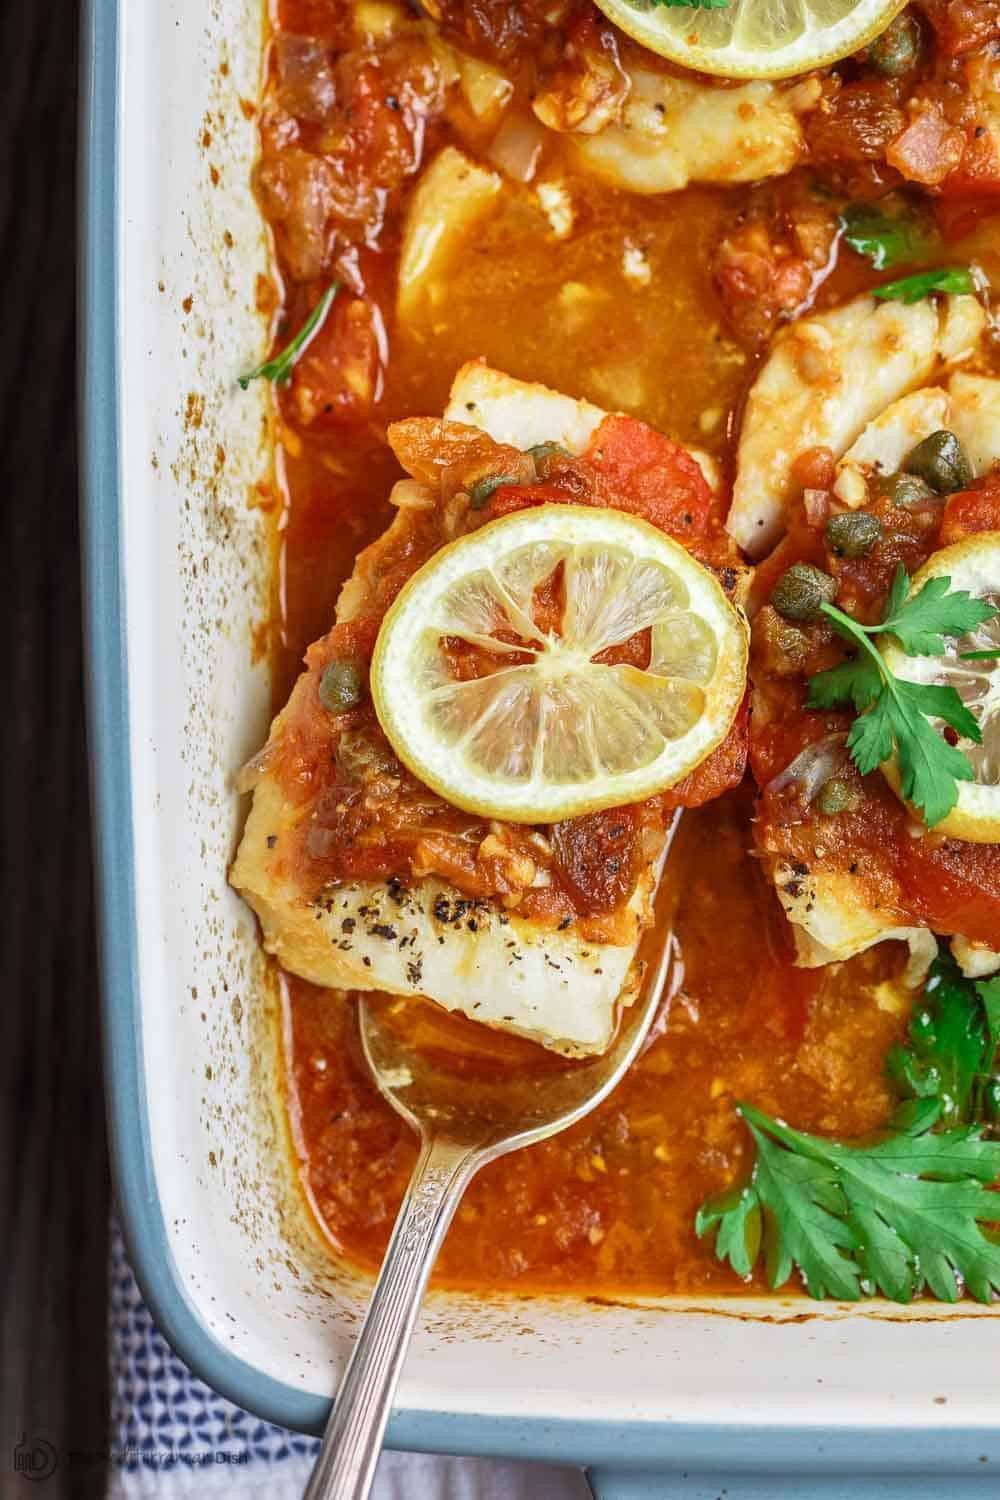 Mediterranean Diet Fish Recipes
 Mediterranean Baked Fish Recipe with Tomatoes and Capers